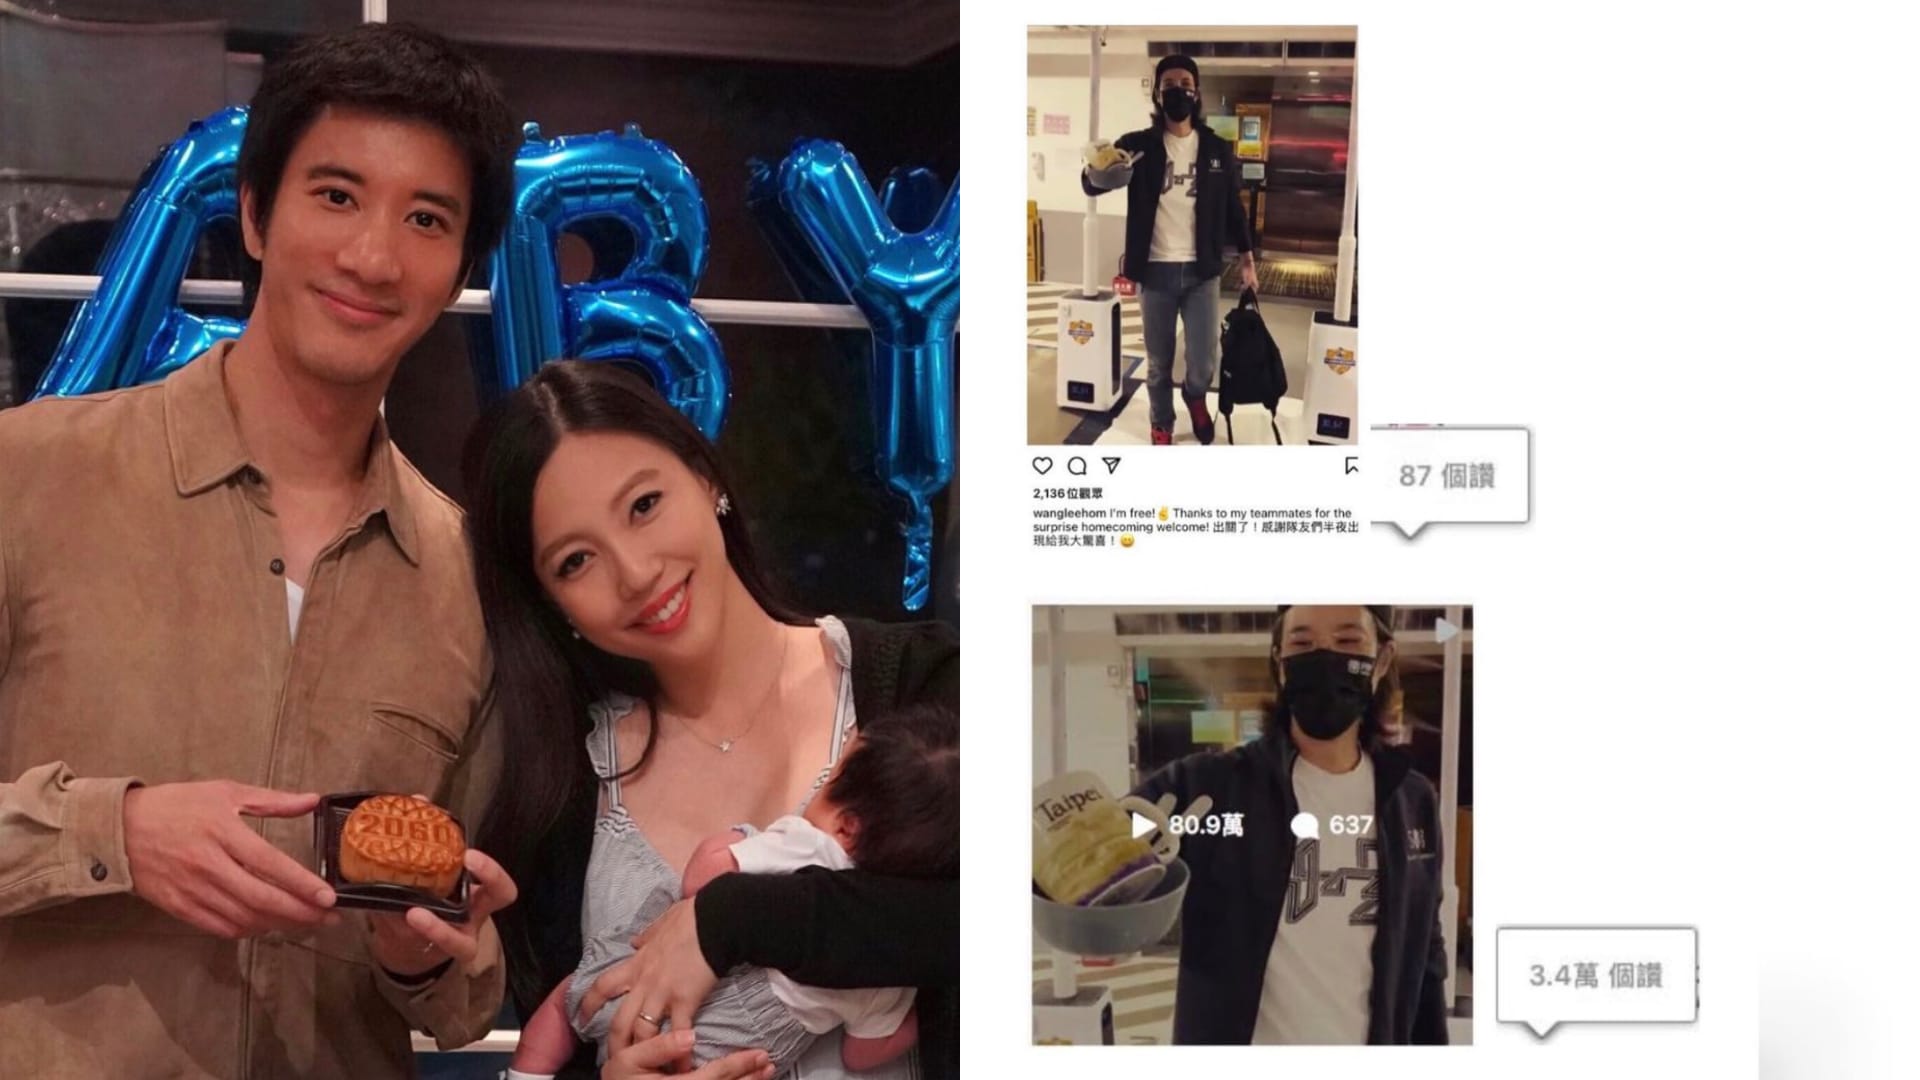 Wang Leehom’s Lawyer Says He Shouldn’t Be Alone With Lee Jinglei Without An Approved Adult; She Accuses Him Of Buying ‘Likes’ On Social Media